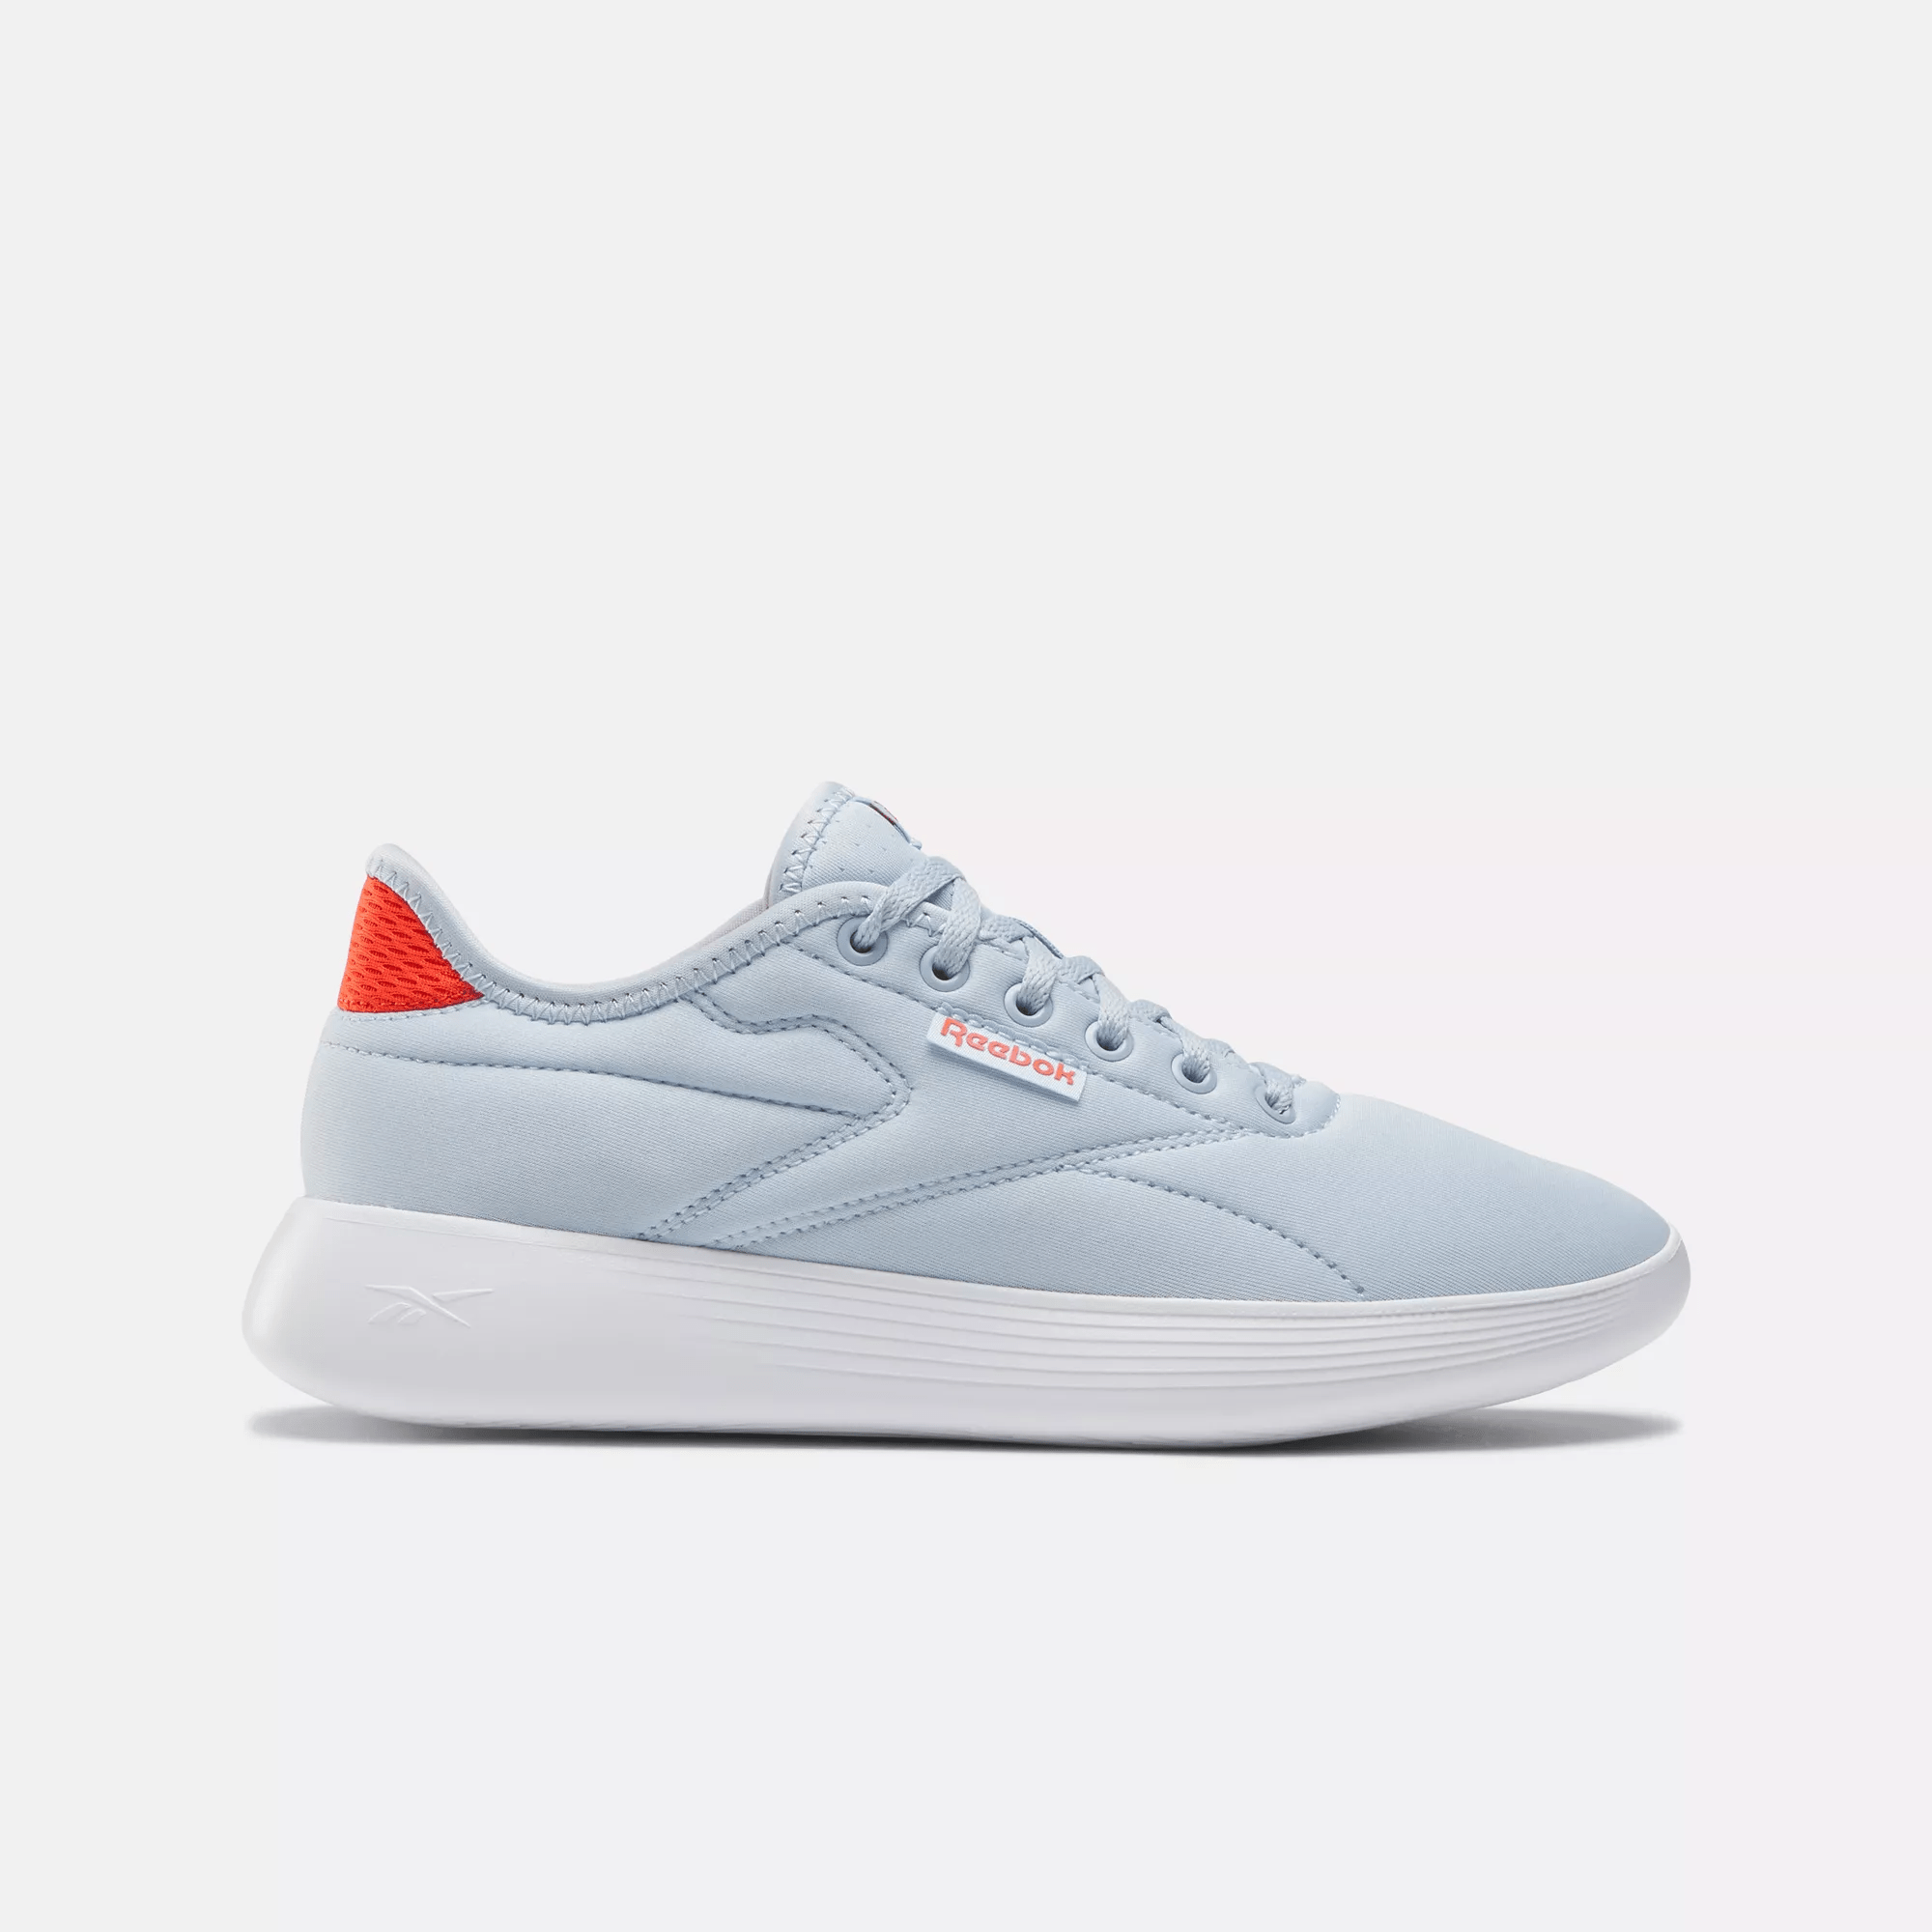 Reebok Active Lite Women's Shoes In Pale Blue/vector Red/white